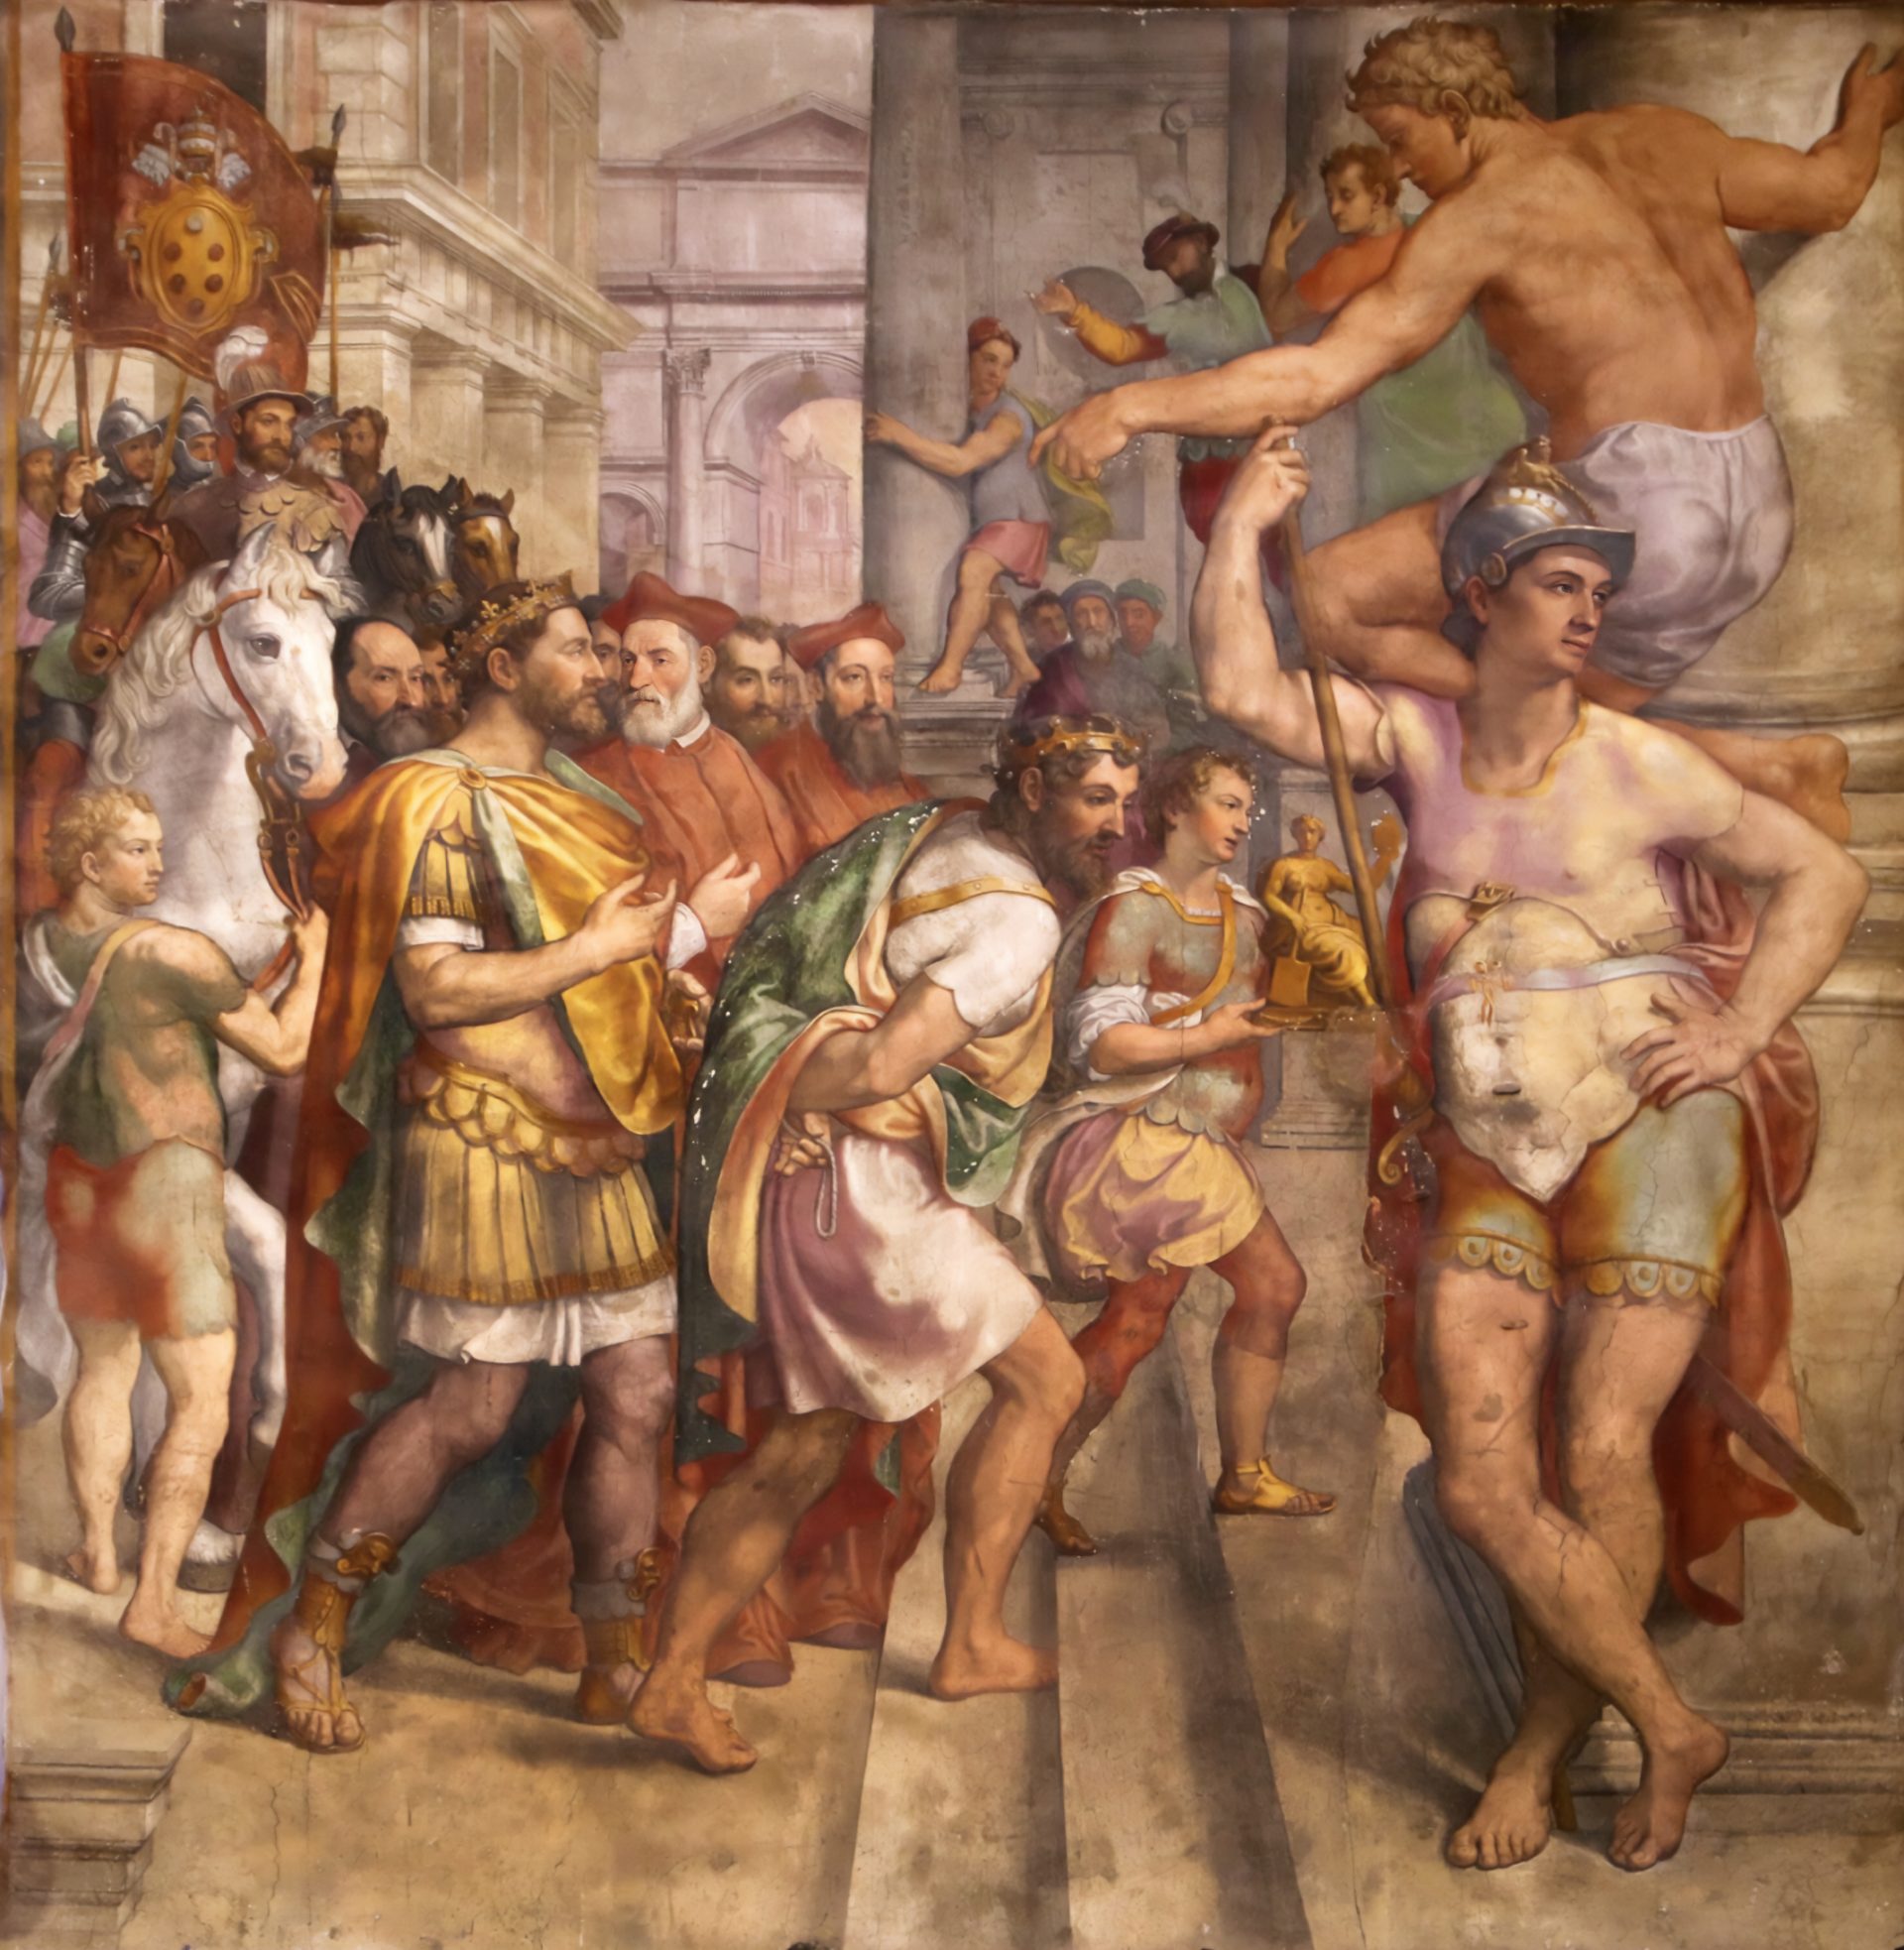 A painting of Pepin the Short donating reclaimed lands to Pope Stephen II in 756. The painting shows Pepin, wearing a crown. Behind them are several men, some on horseback, wearing various colors and styles of clothing. The background depicts a city square with classical buildings.